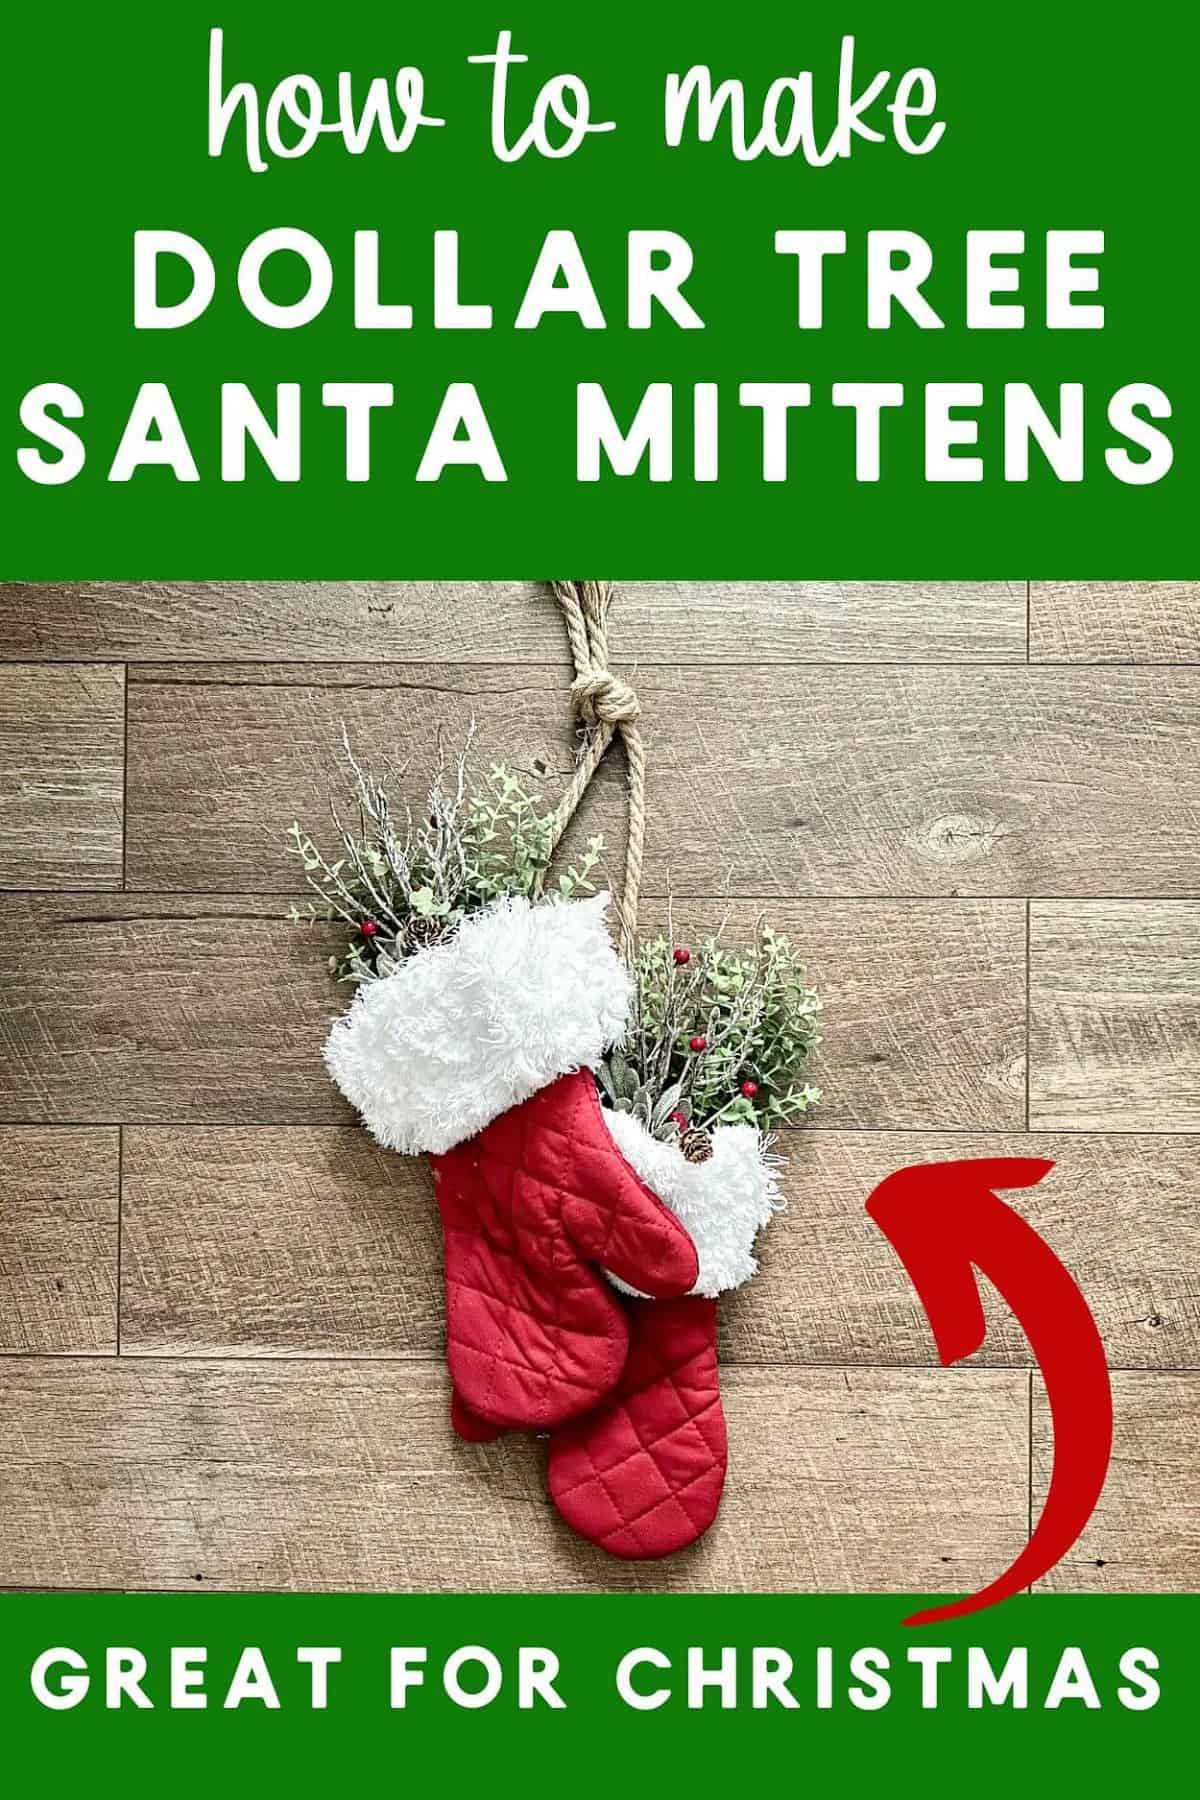 A vertical image showing a pair of Santa mittens with greenery hanging on a wooden surface.